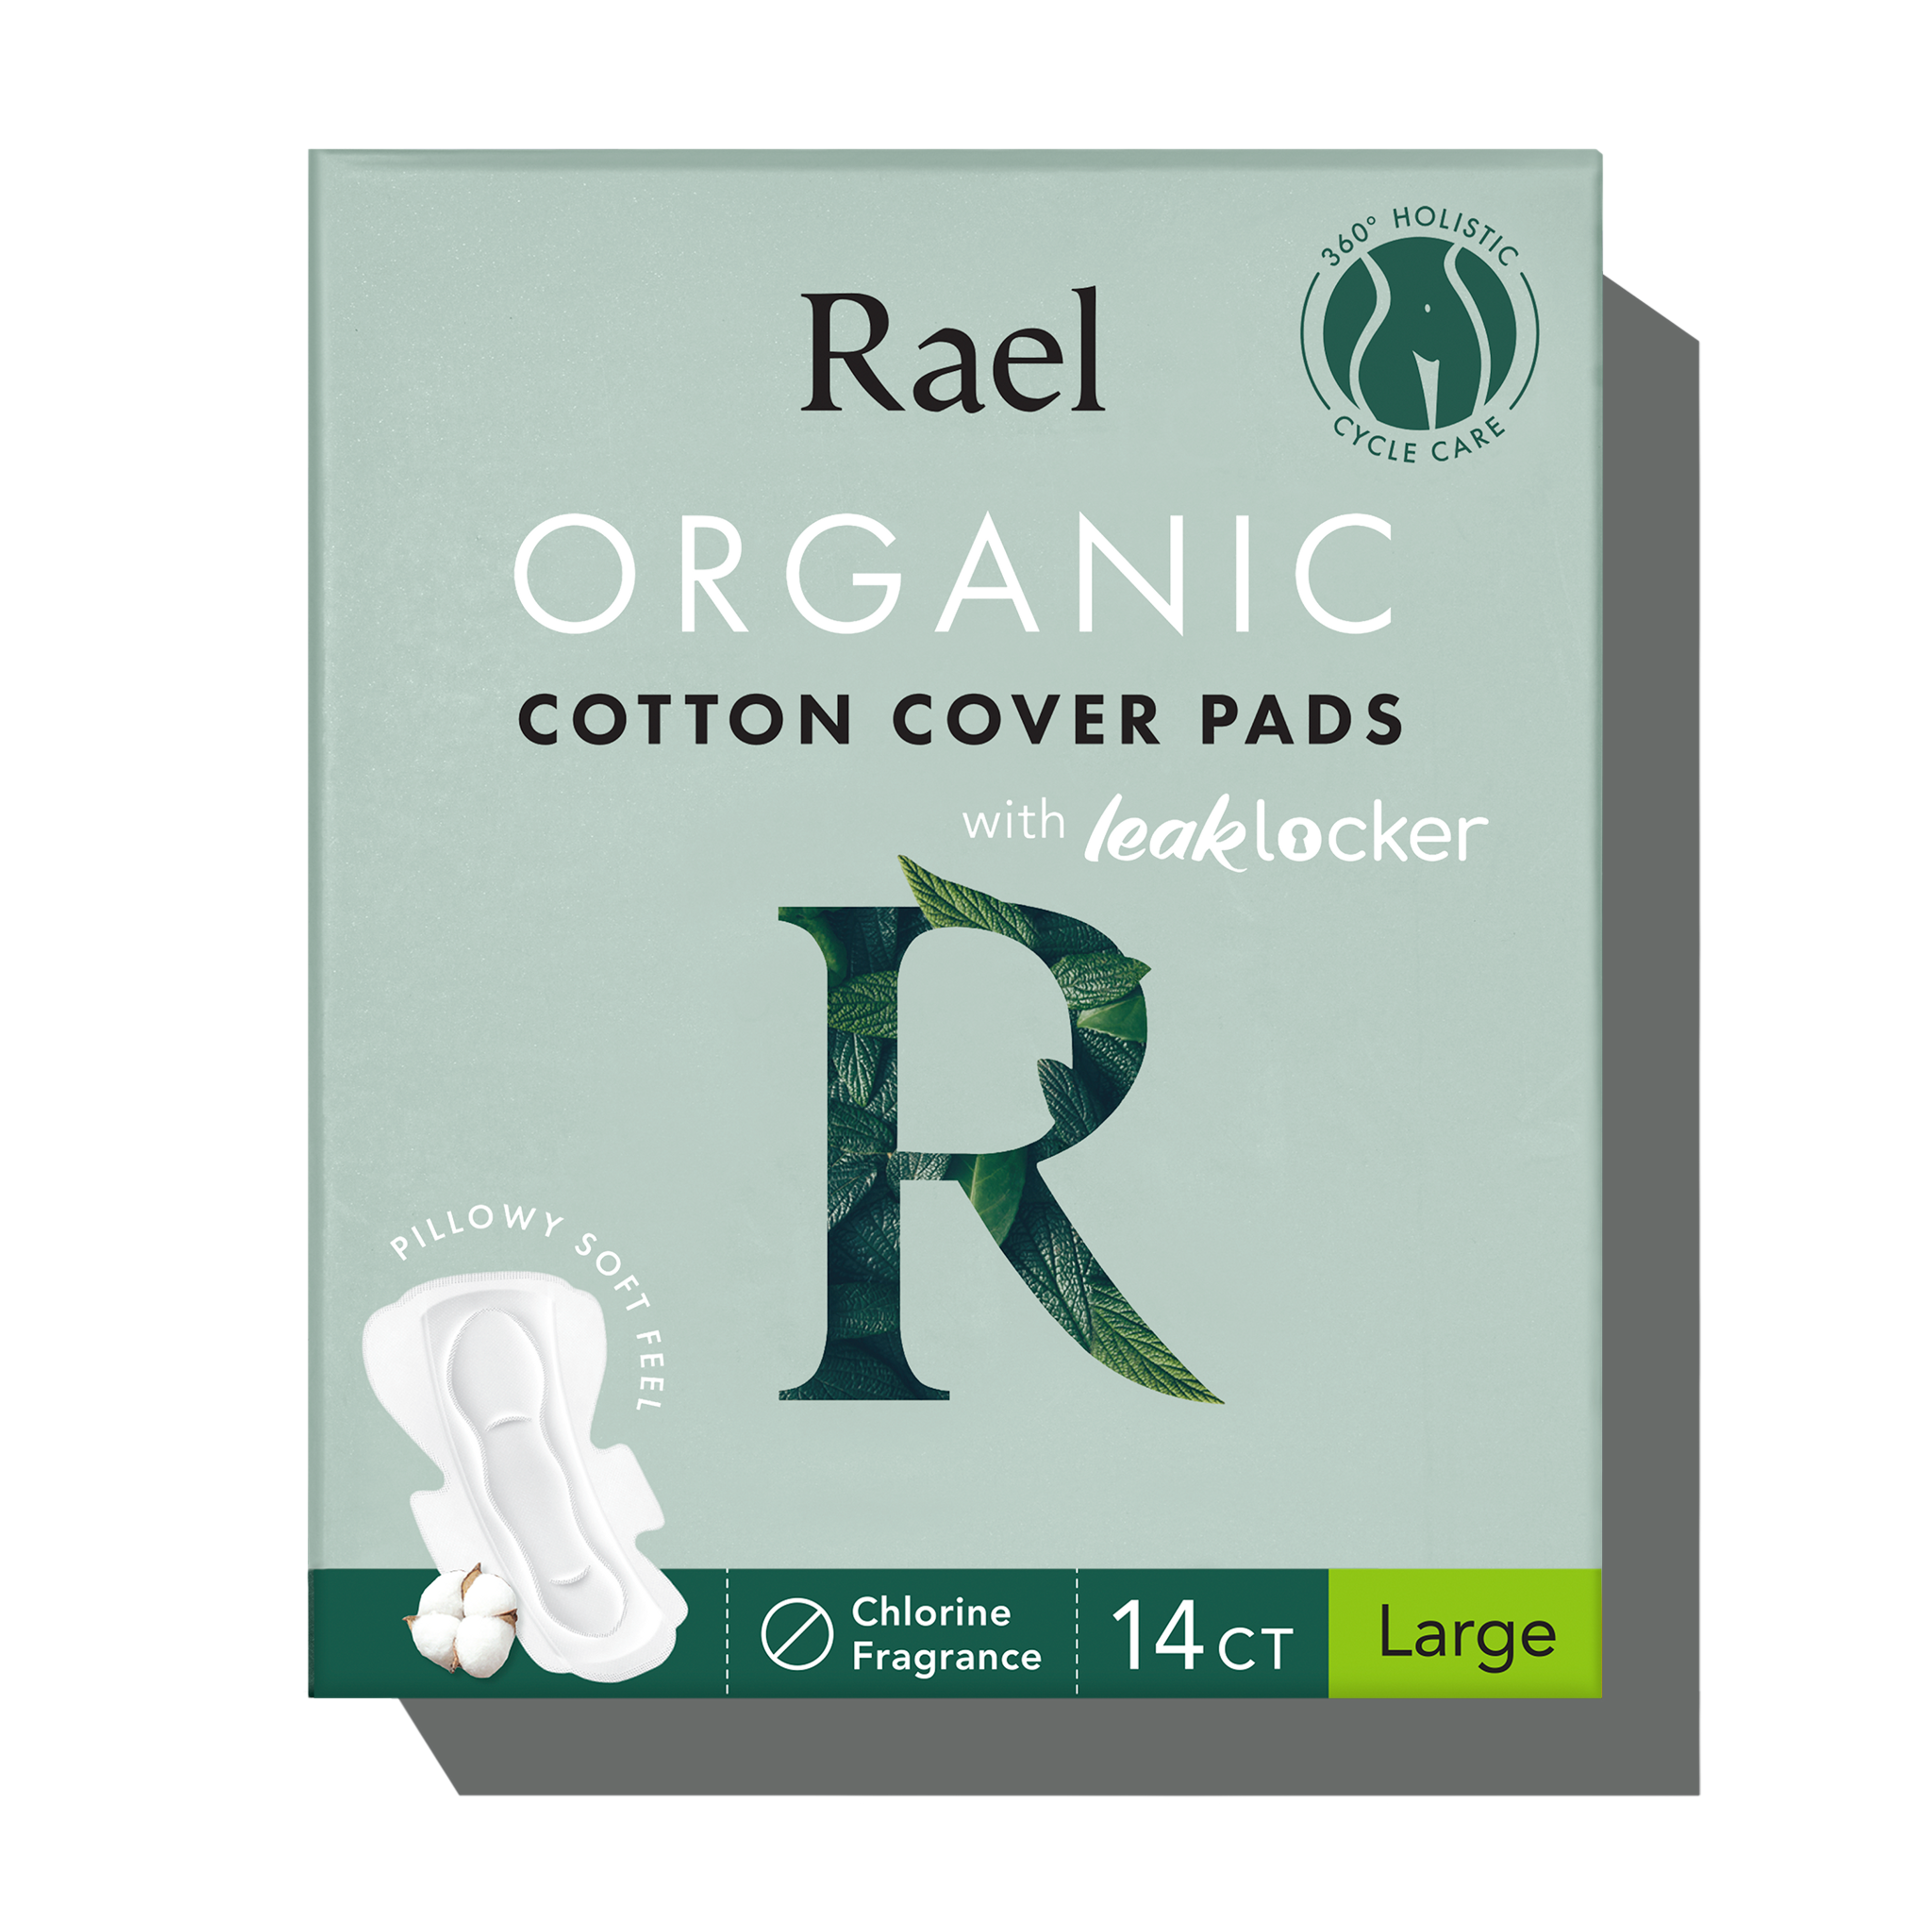 www.getrael.com/products/organic-cotton-pads